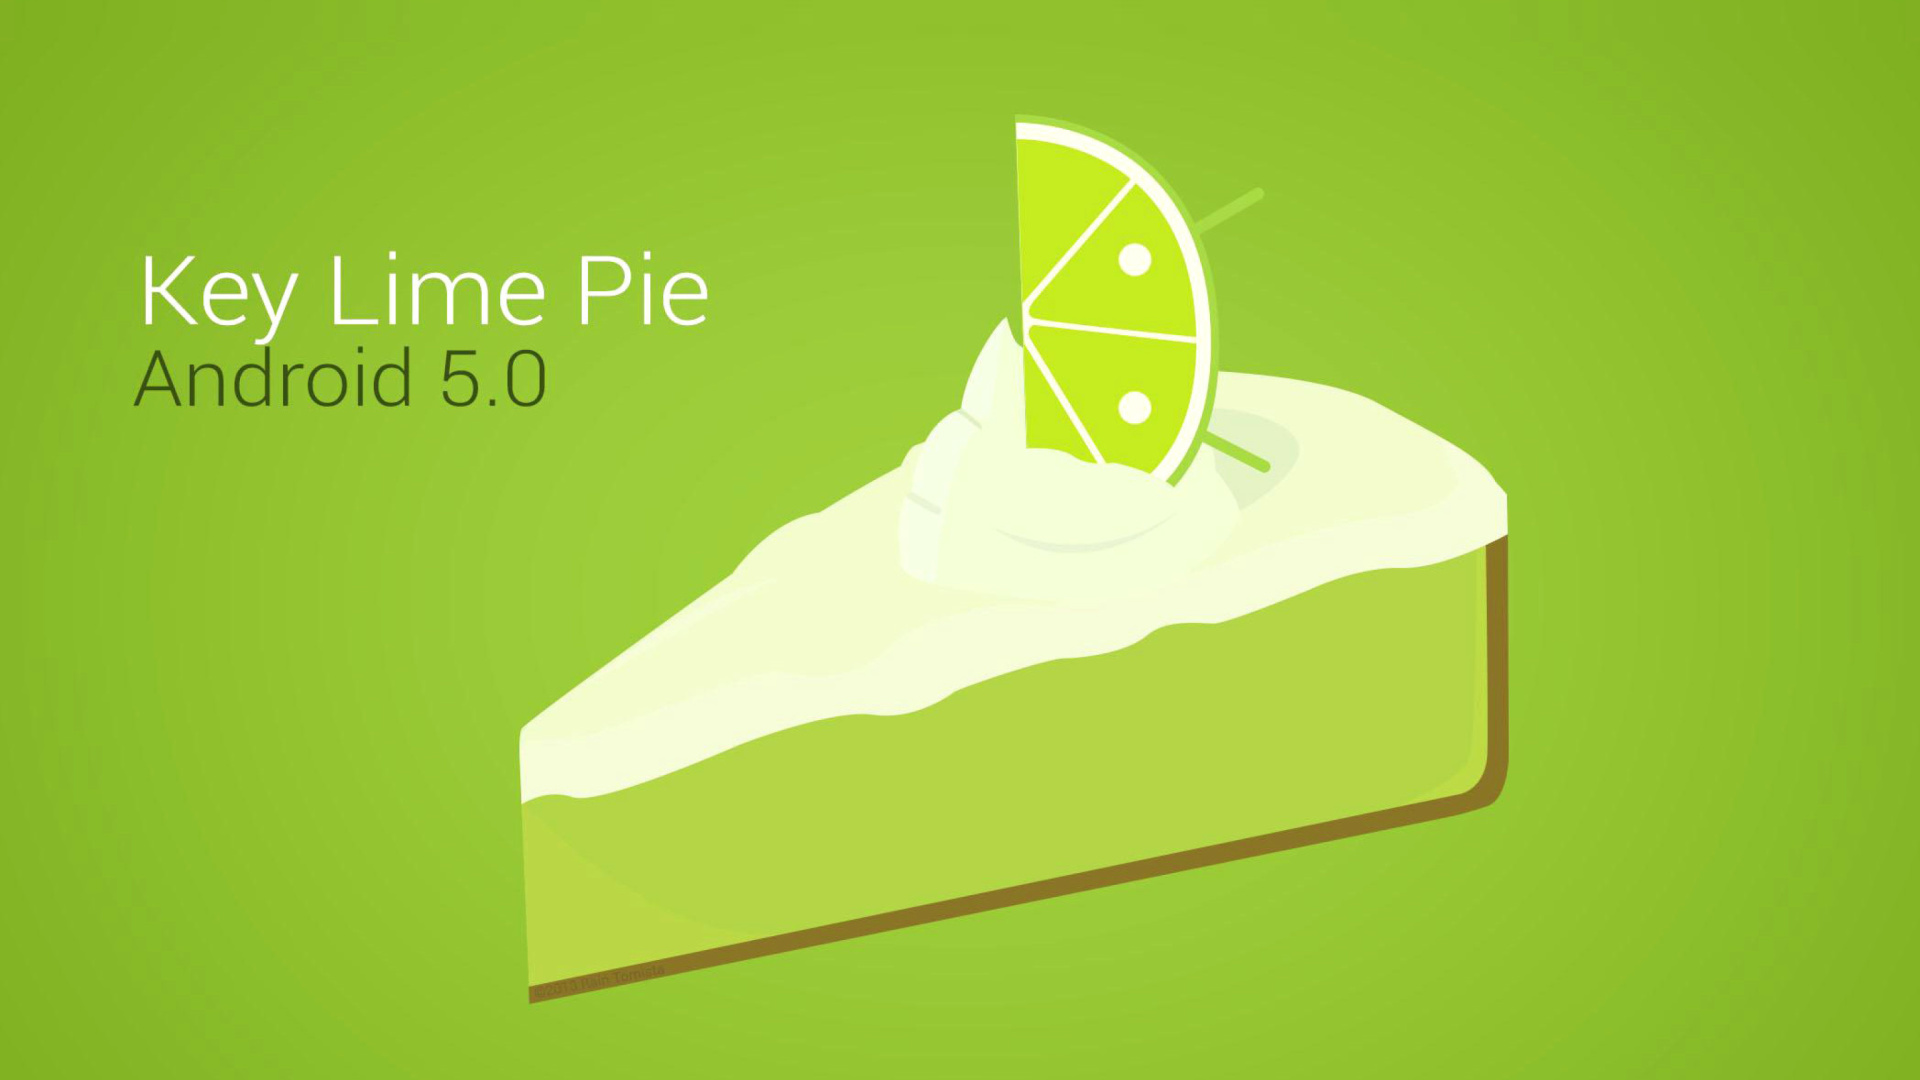 Concept Android 5.0 Key Lime Pie wallpaper 1920x1080